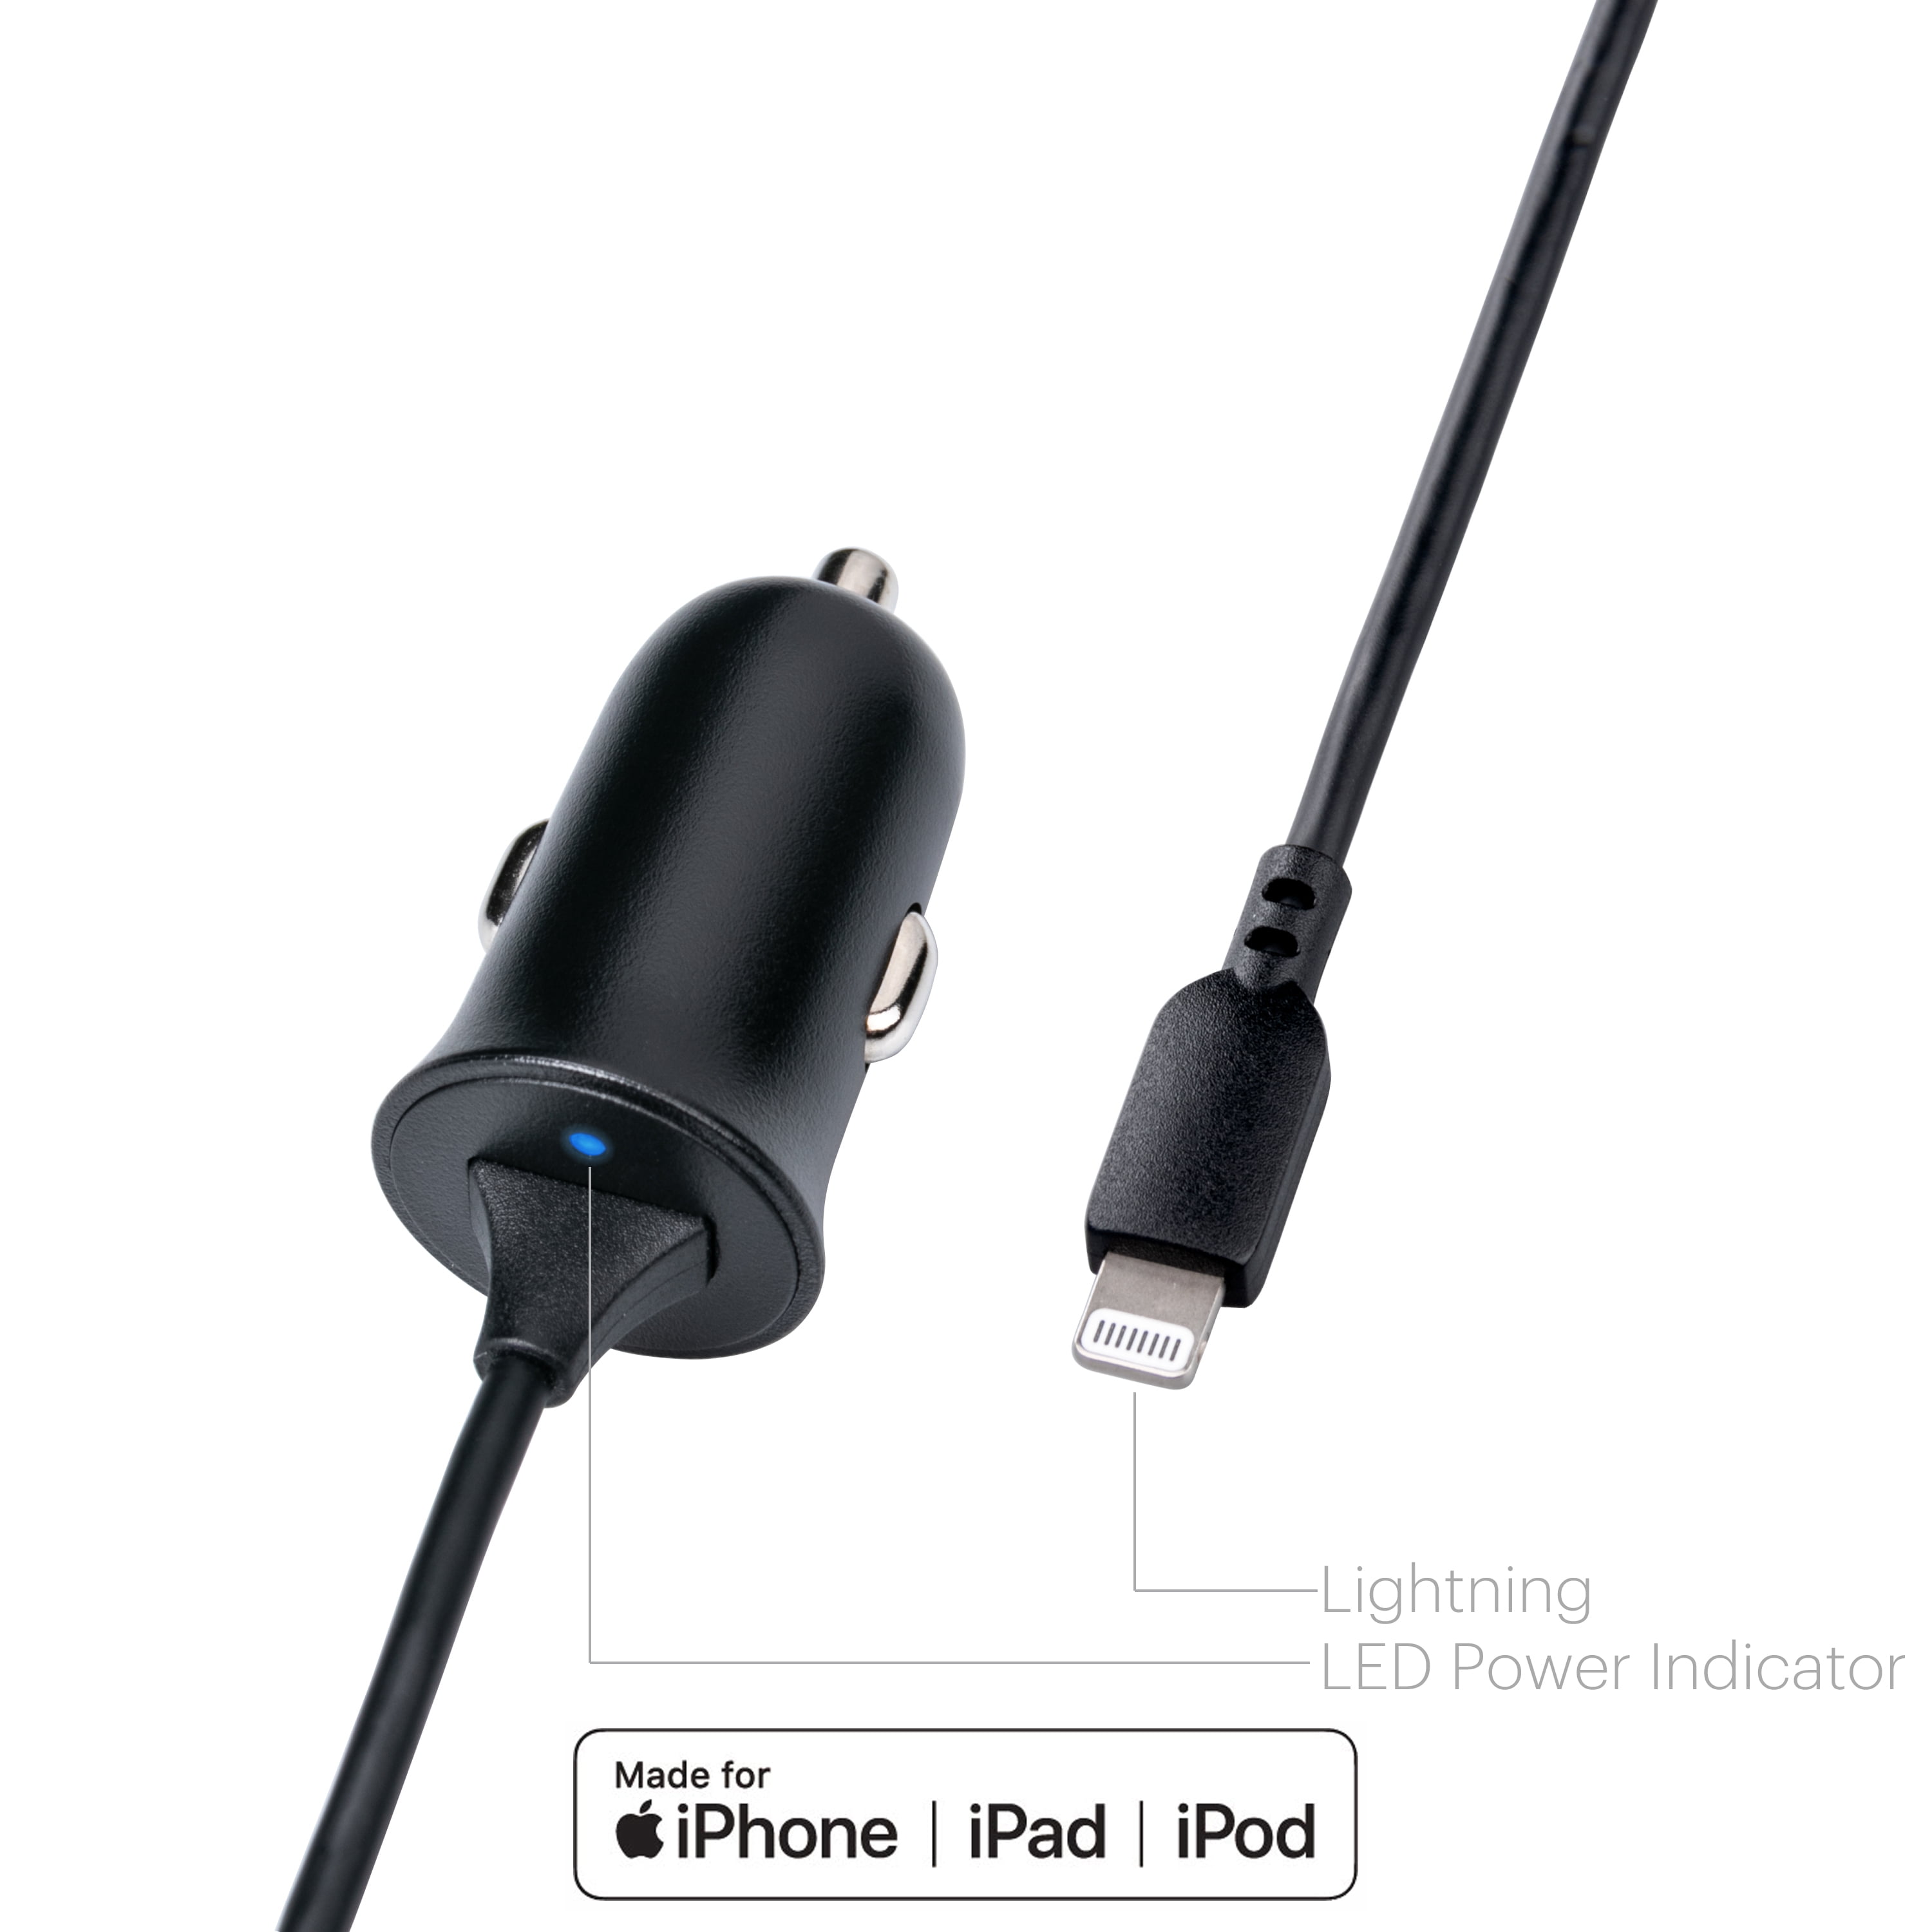 onn. 2.4A Lightning Car Charger, Vehicle Adapter for iPhone, iPad and iPod,  Black